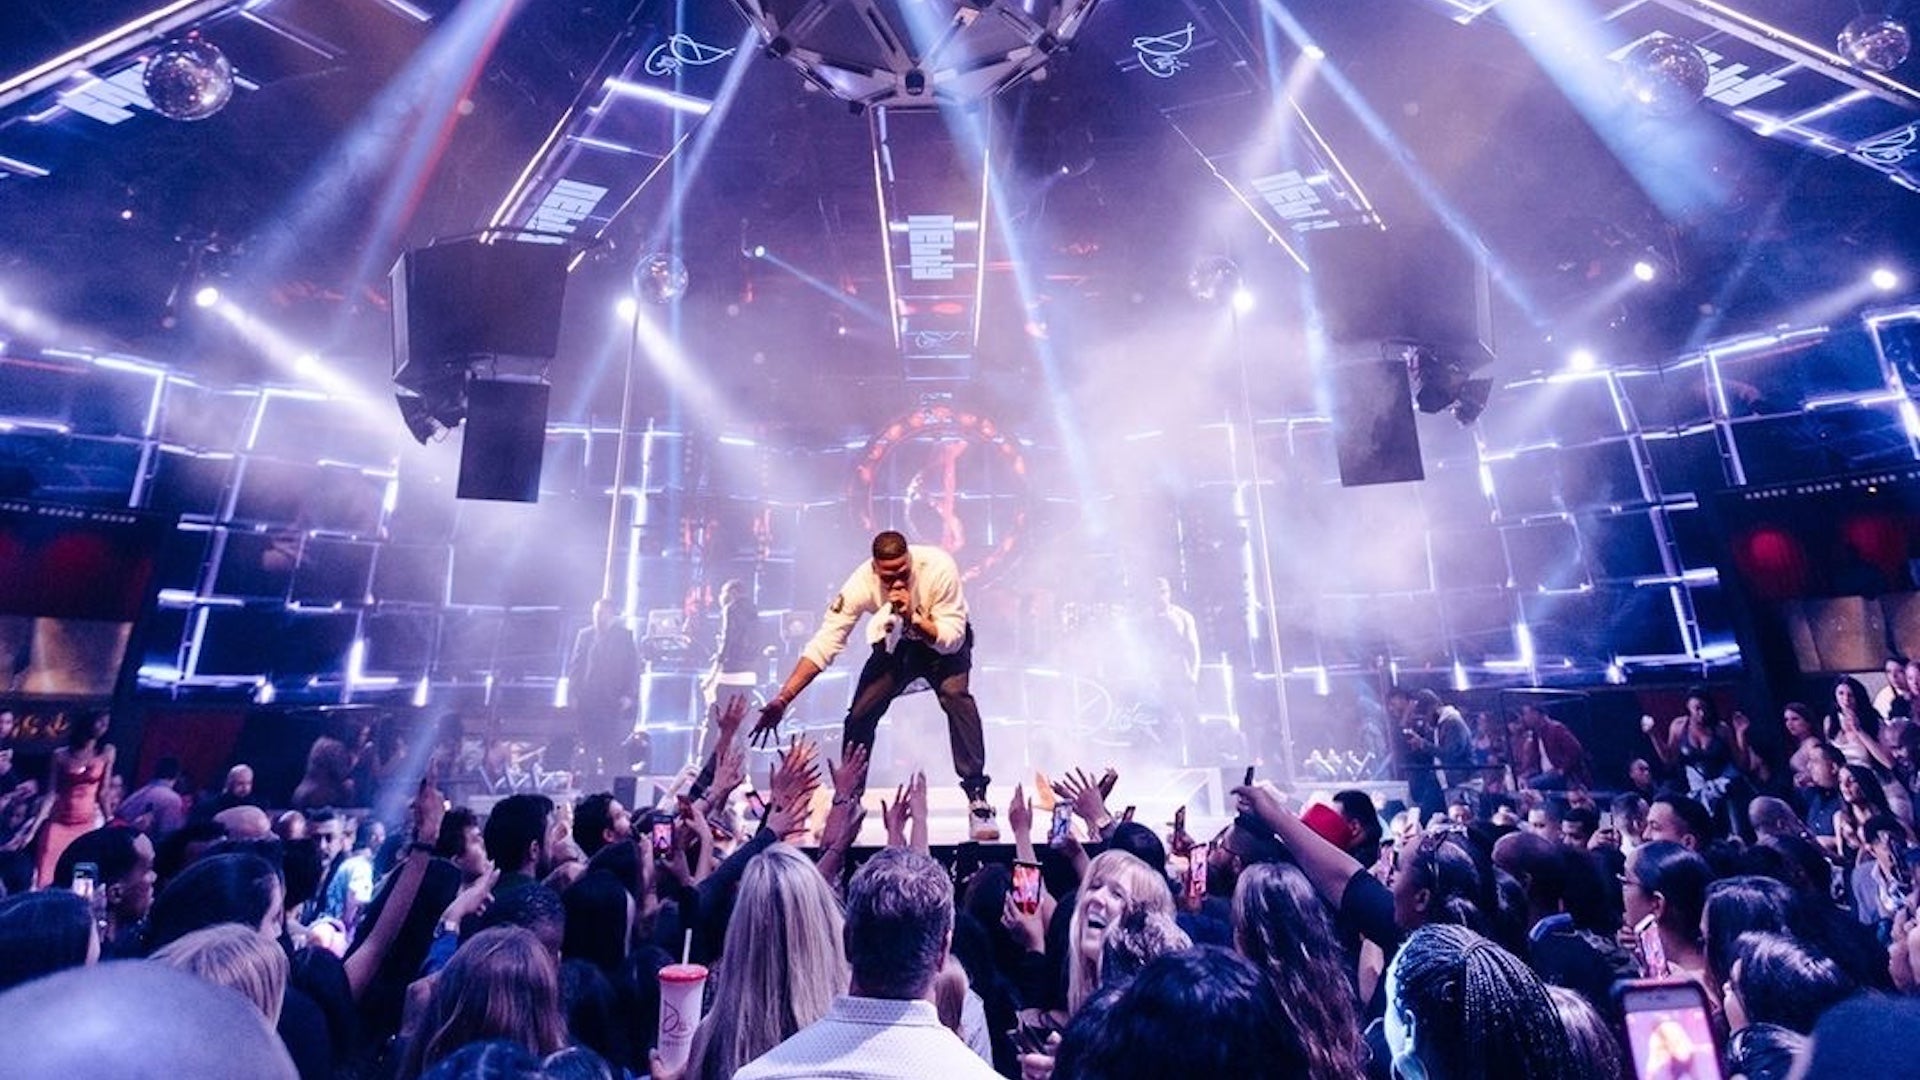 Person standing on a stage performing for a crowd under bright lights